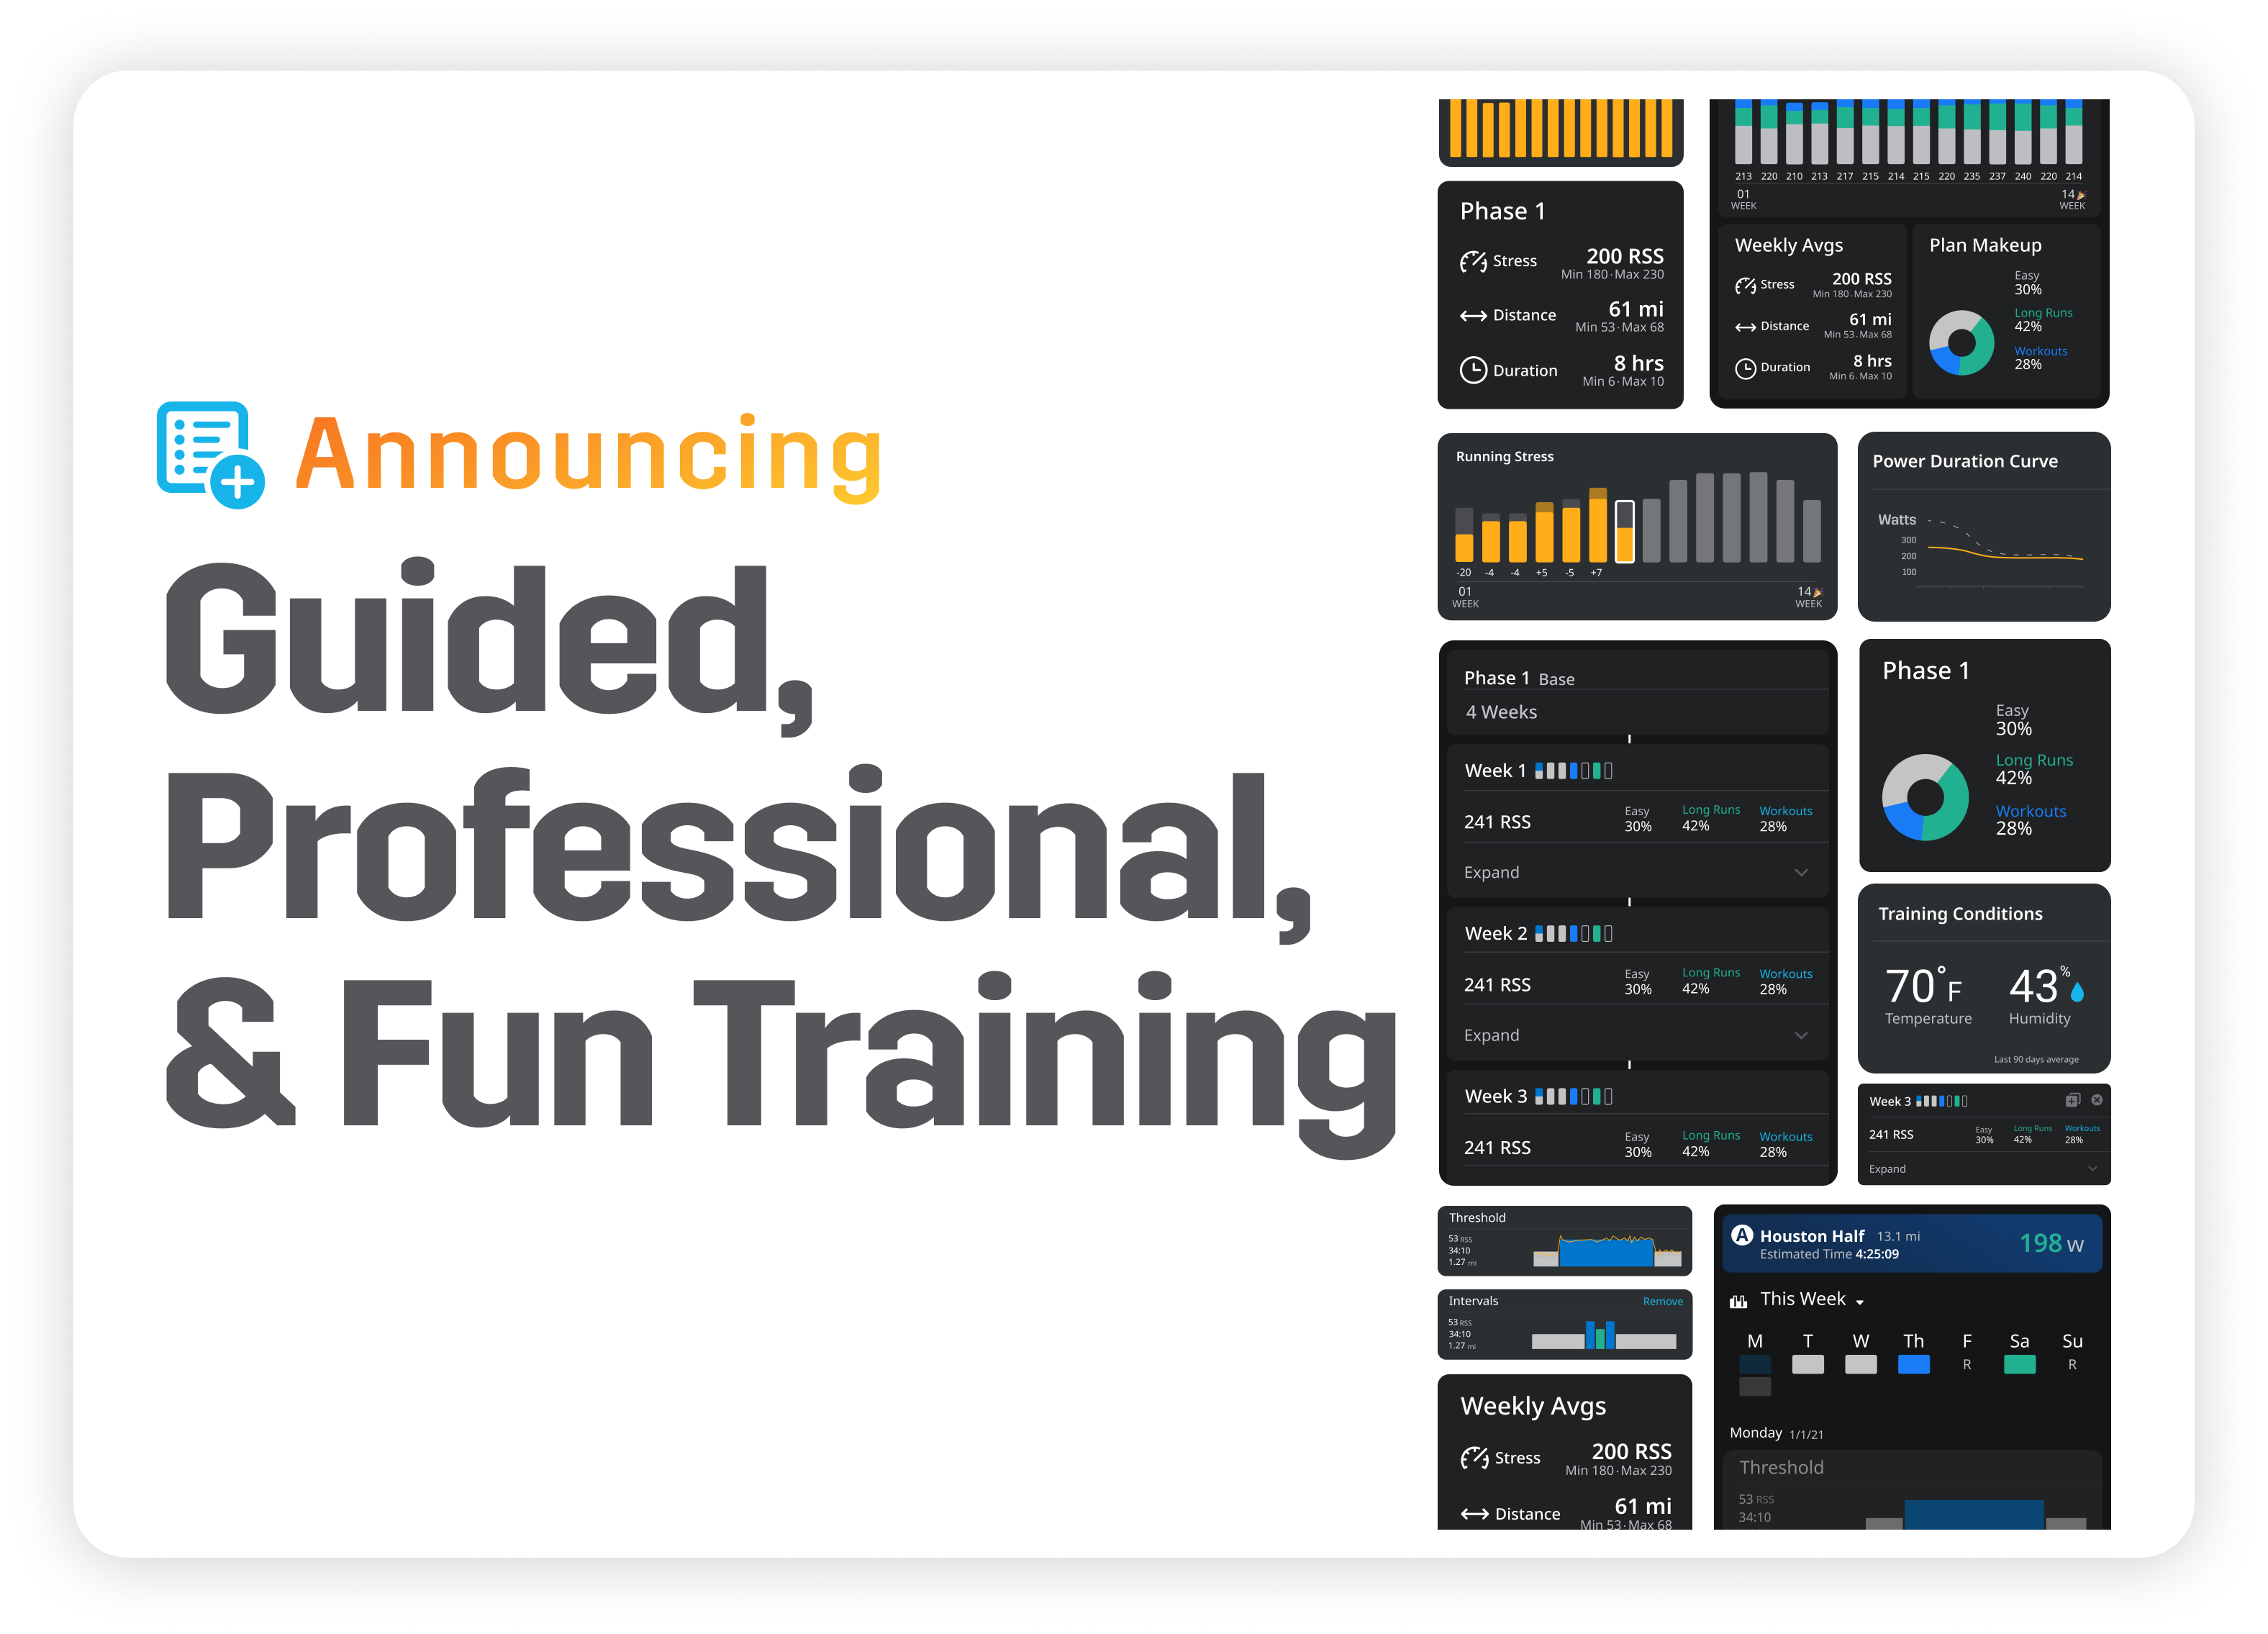 Major Stryd Launch: Guided, Professional, & Fun Training